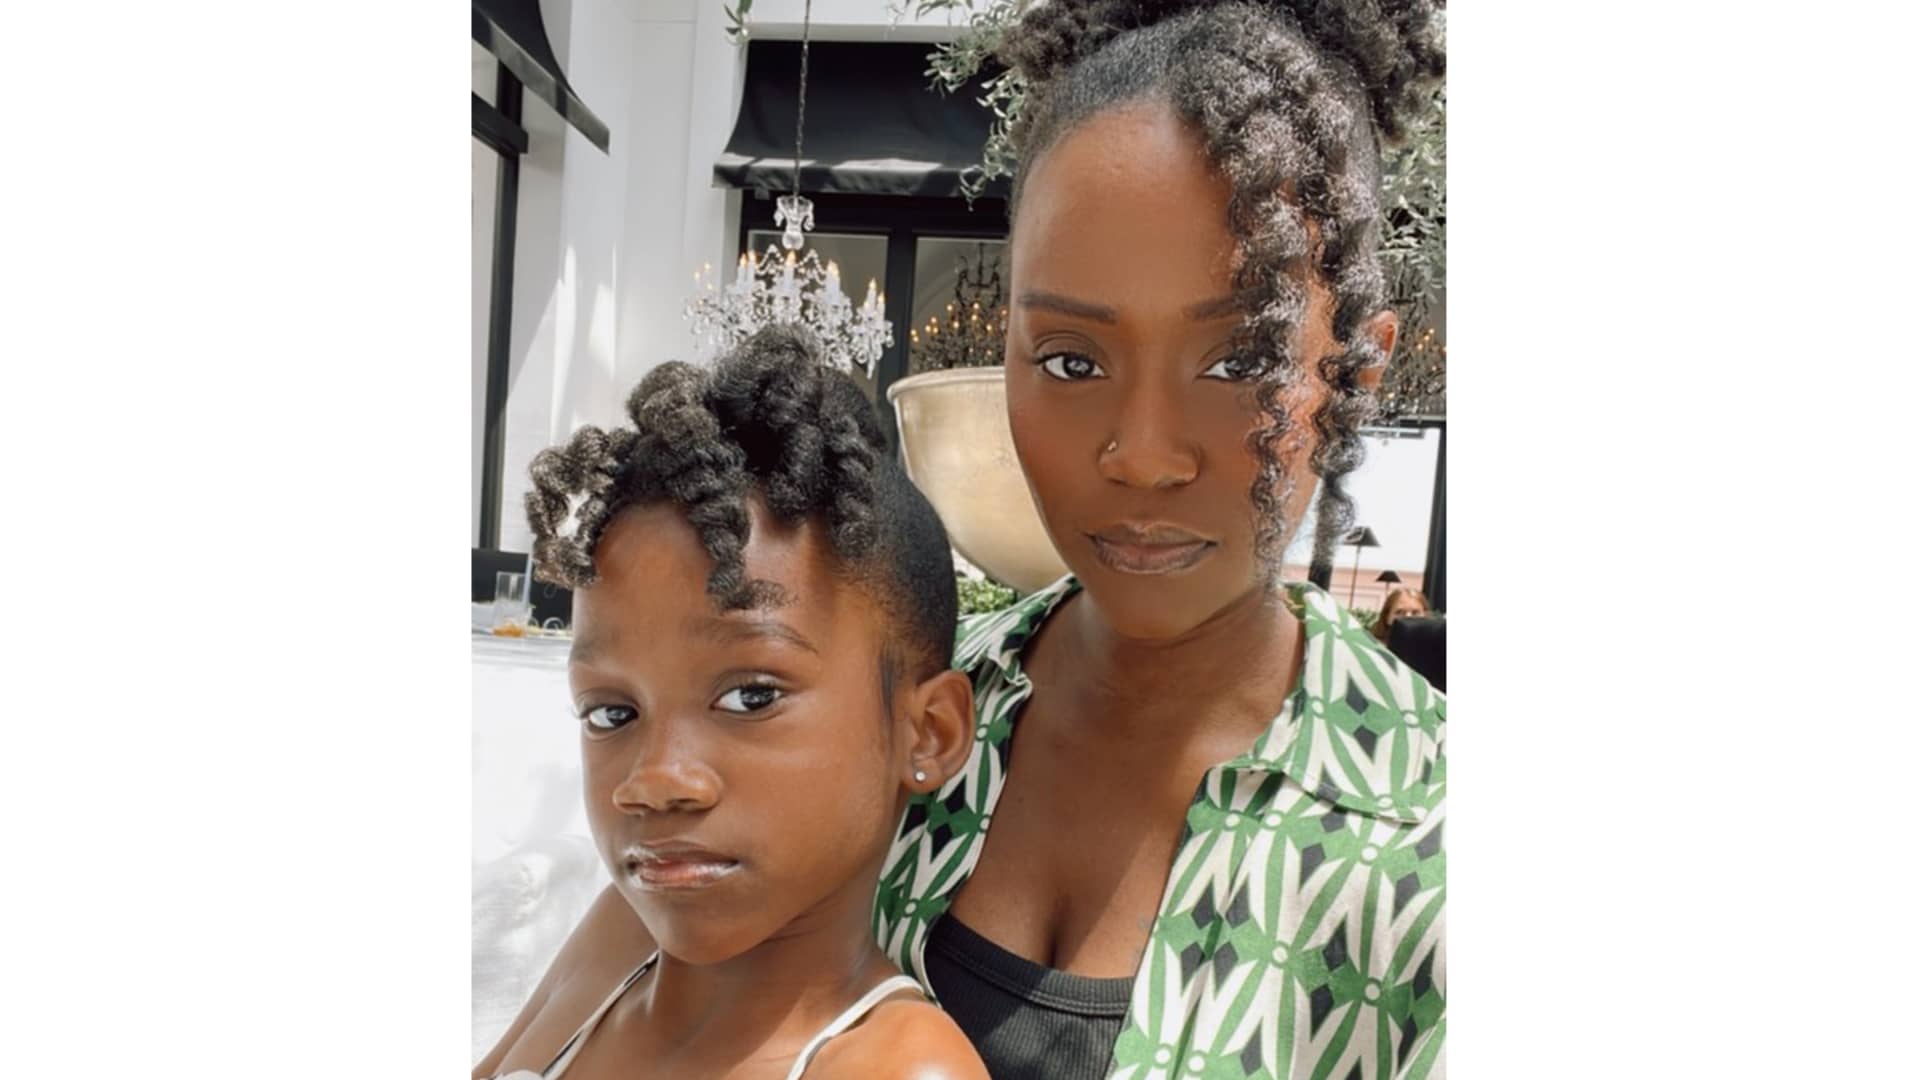 Karla Joseph says her daughter Marley-Rose, 8, has become fascinated with skincare and recently spent her birthday at Sephora.